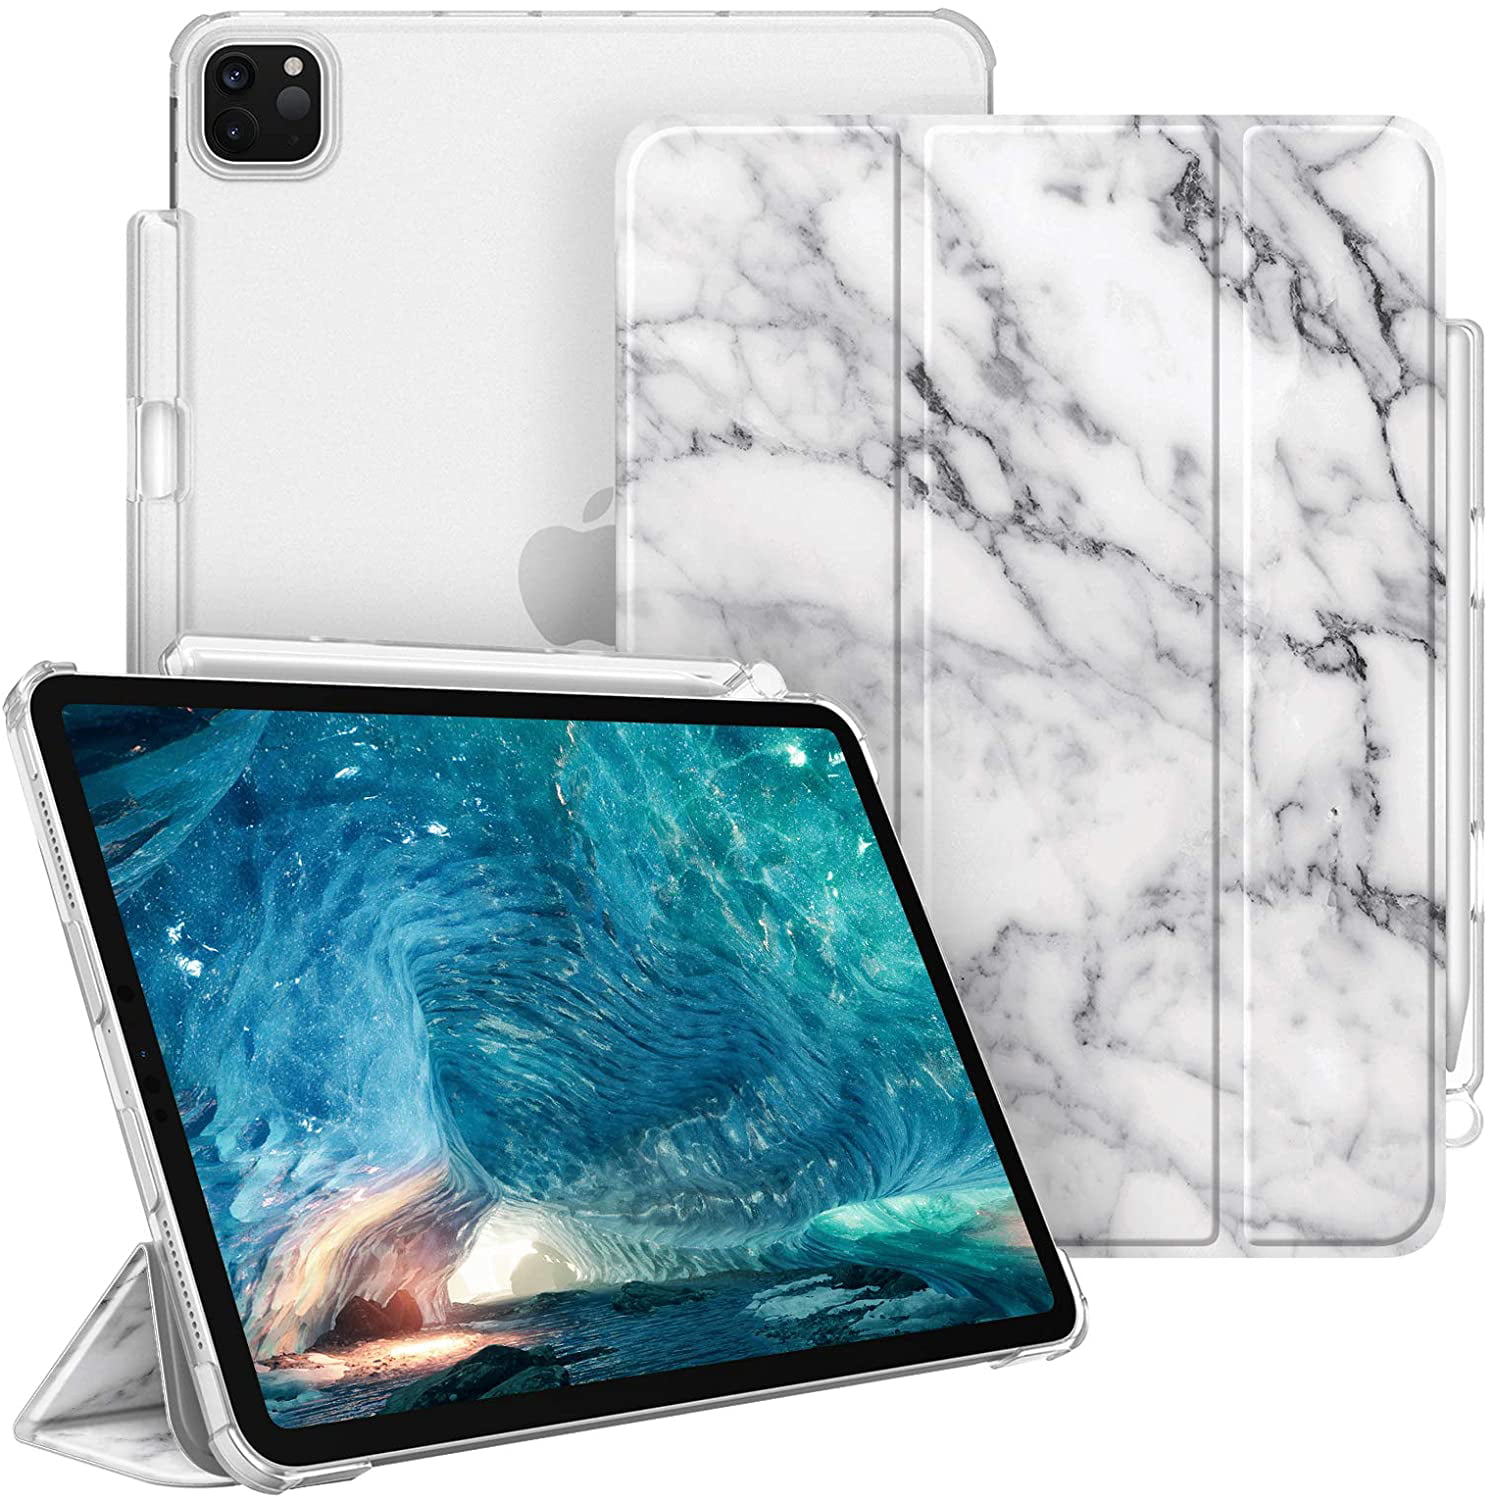 Folio Wallet Deep Sea Animals Protective case for tablet ipad pro 12.8 inch 12.9 and 11 inch 11